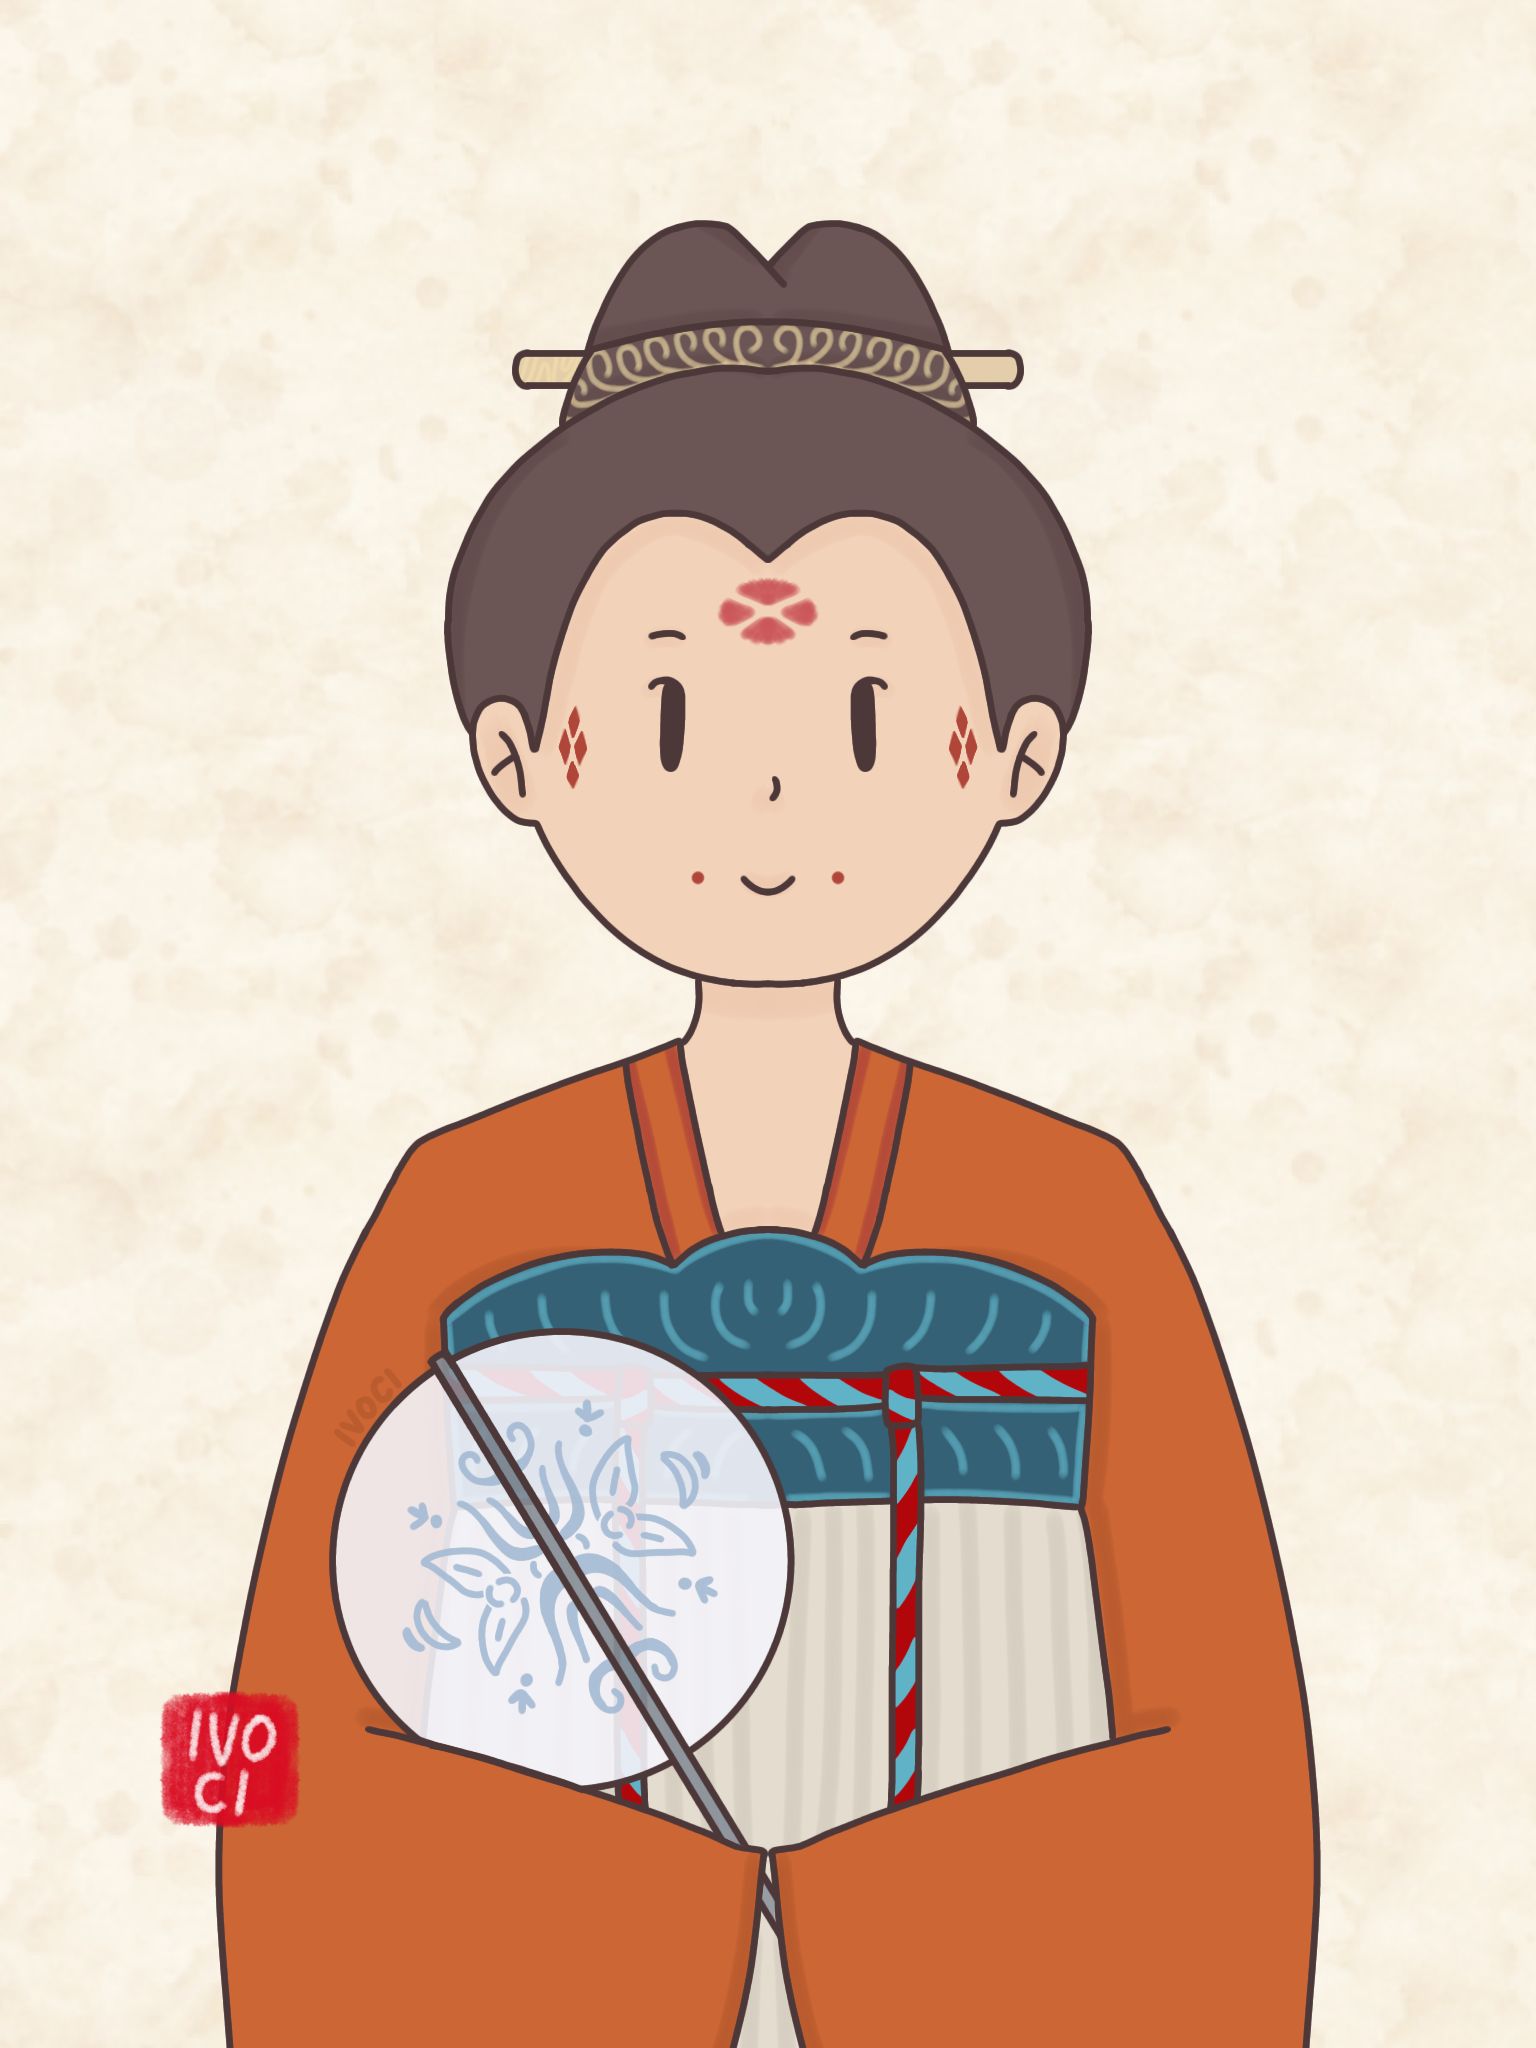 ivoci - Mian Ye 面靥, Ancient China Women Face Dimple Makeup - 1